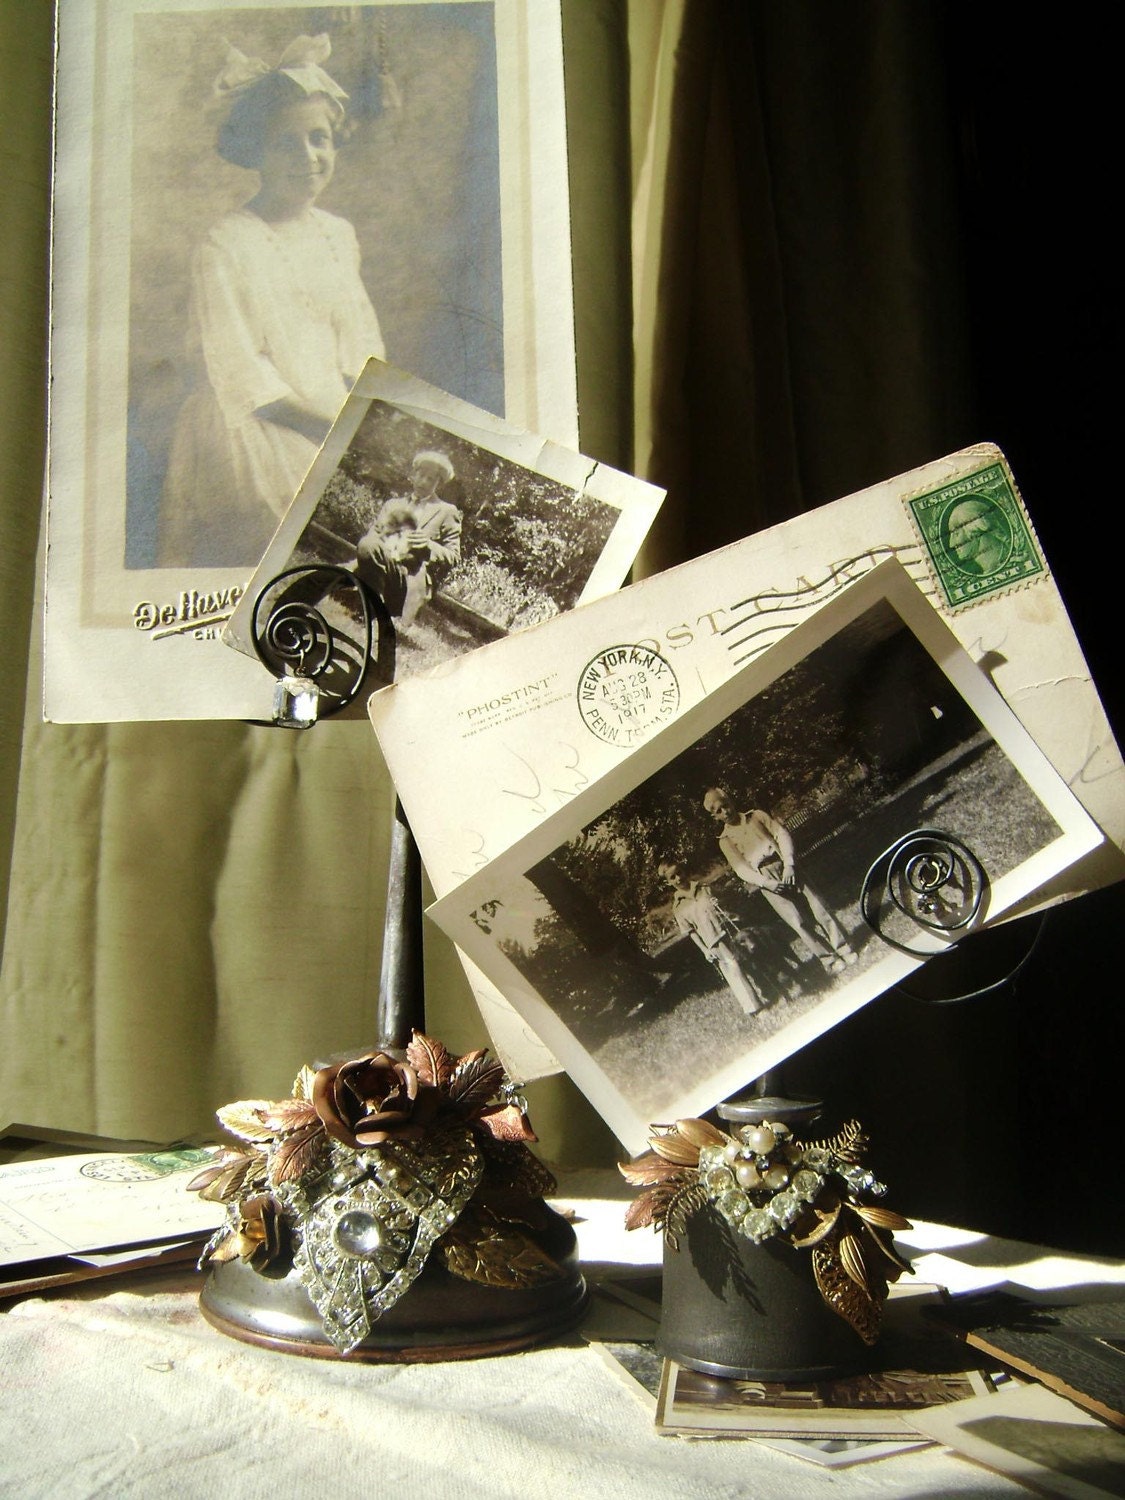 As seen in Somerset Life Magazine, Sweet Nostalgia Oil Can Photograph displays